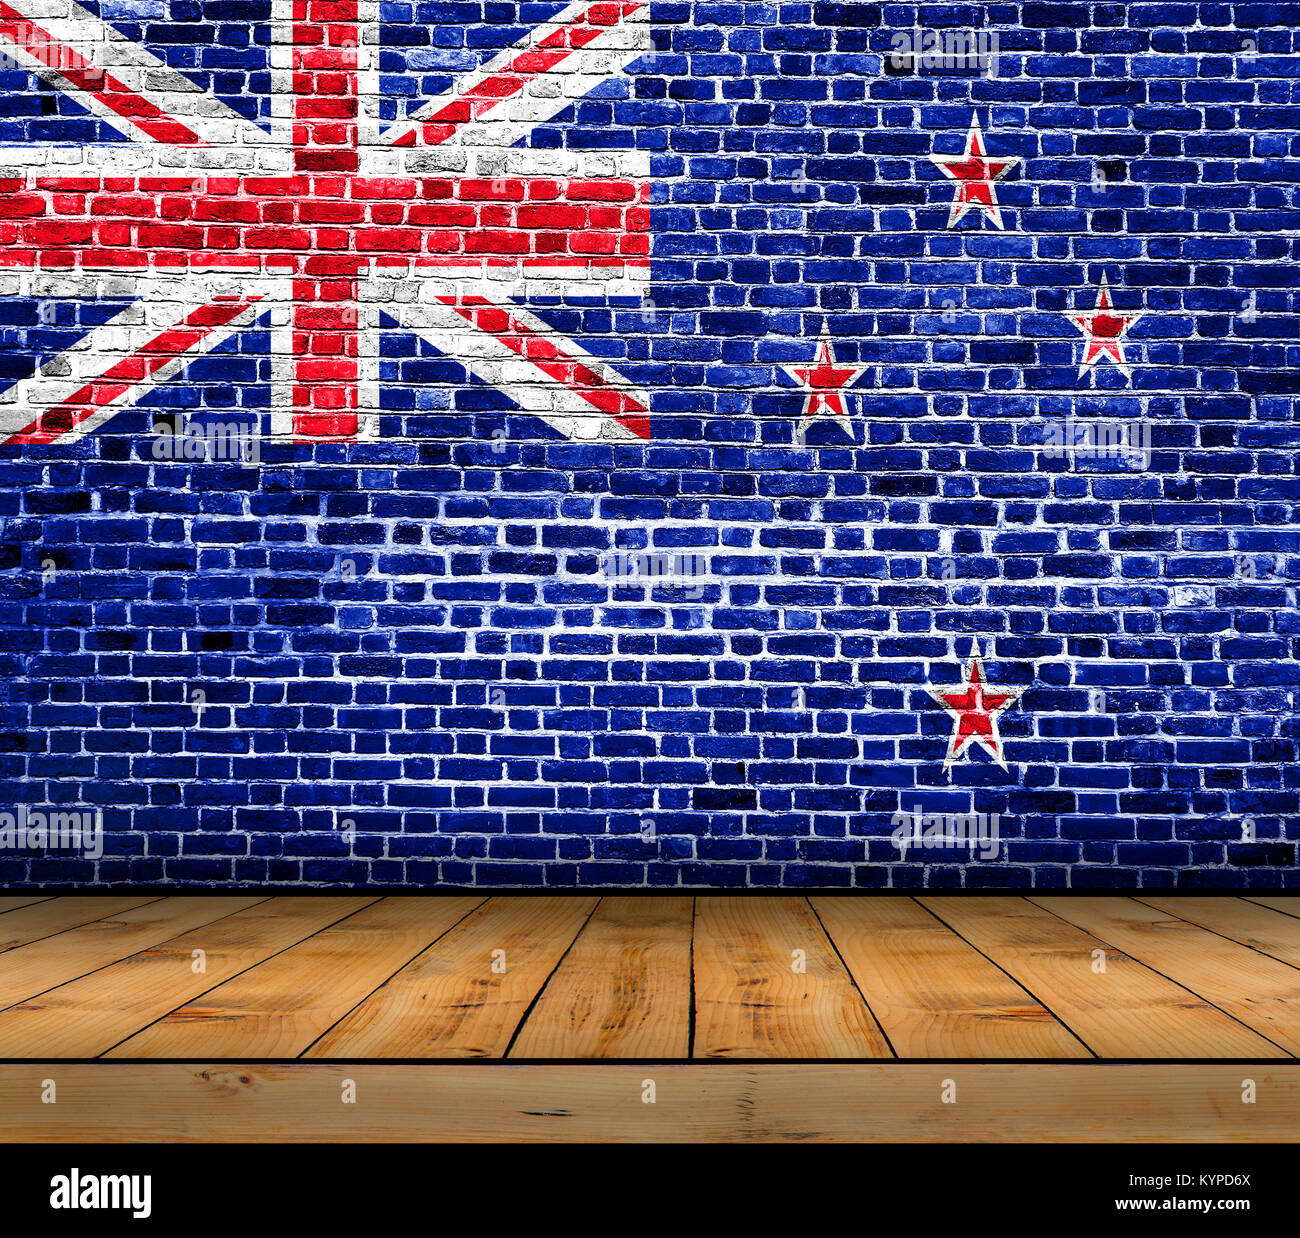 New Zeland flag painted on brick wall with wooden floor Stock Photo